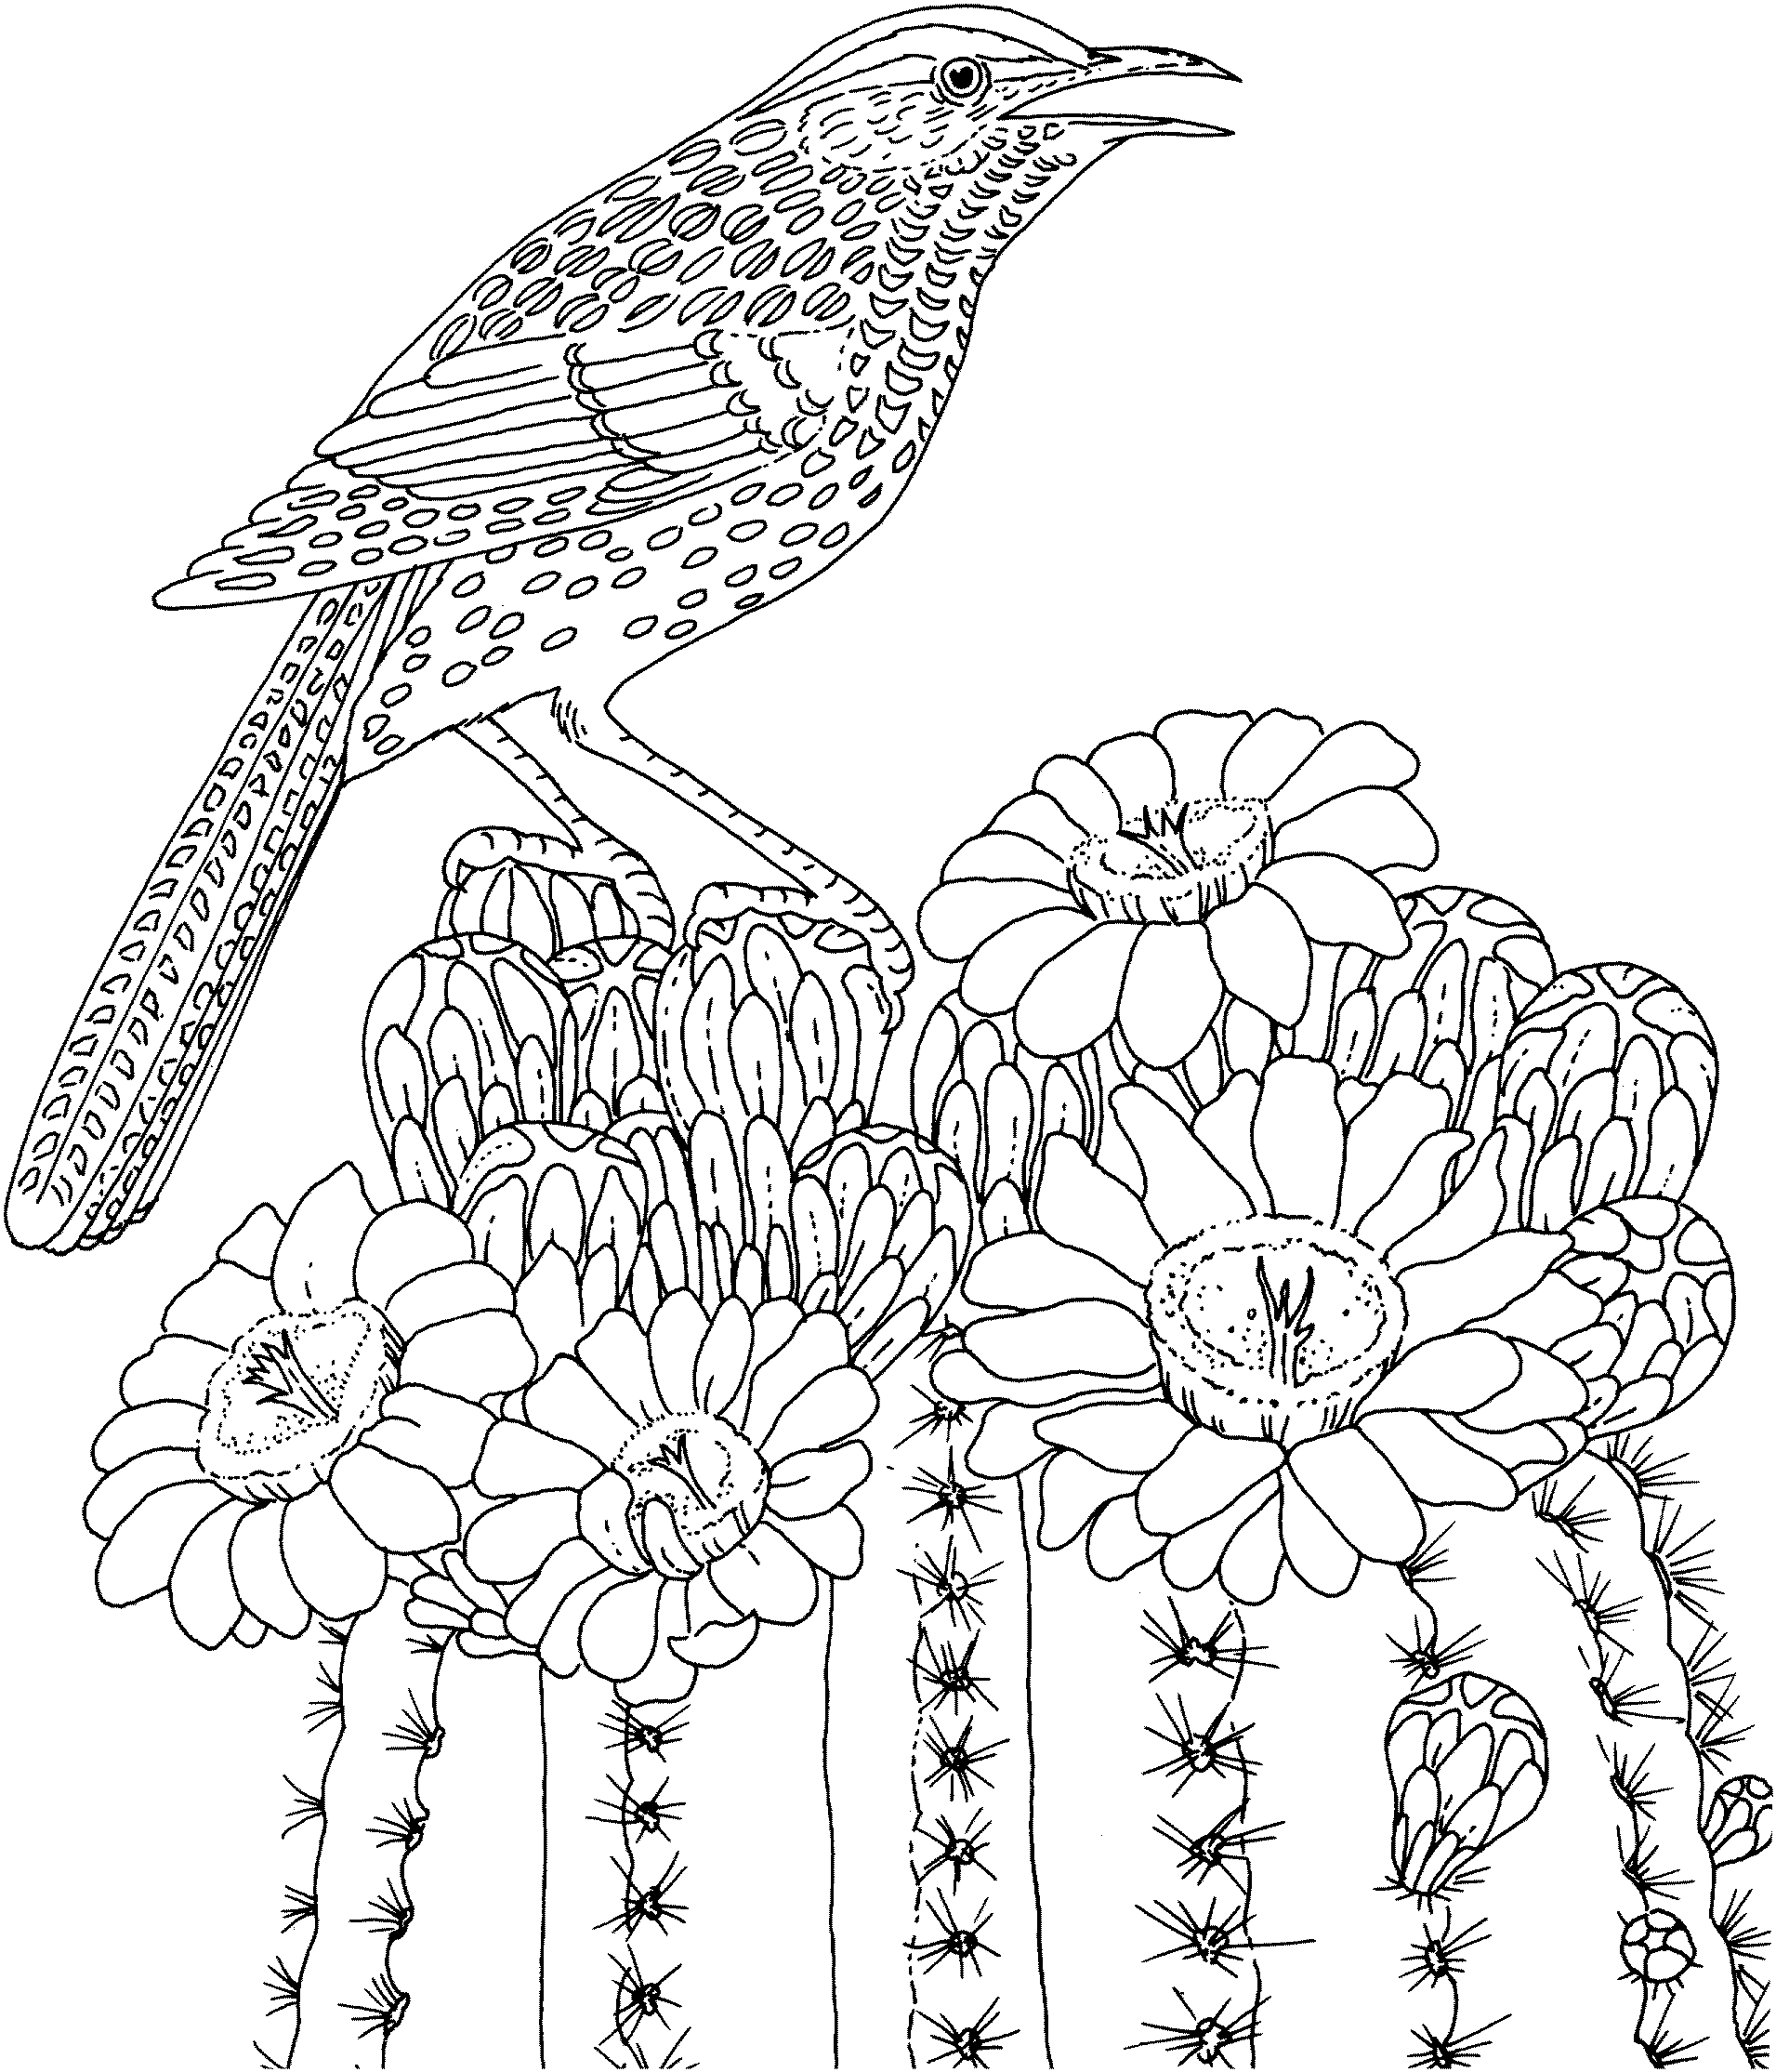 Difficult Animal Coloring Pages Free Intricate Coloring Pages ...